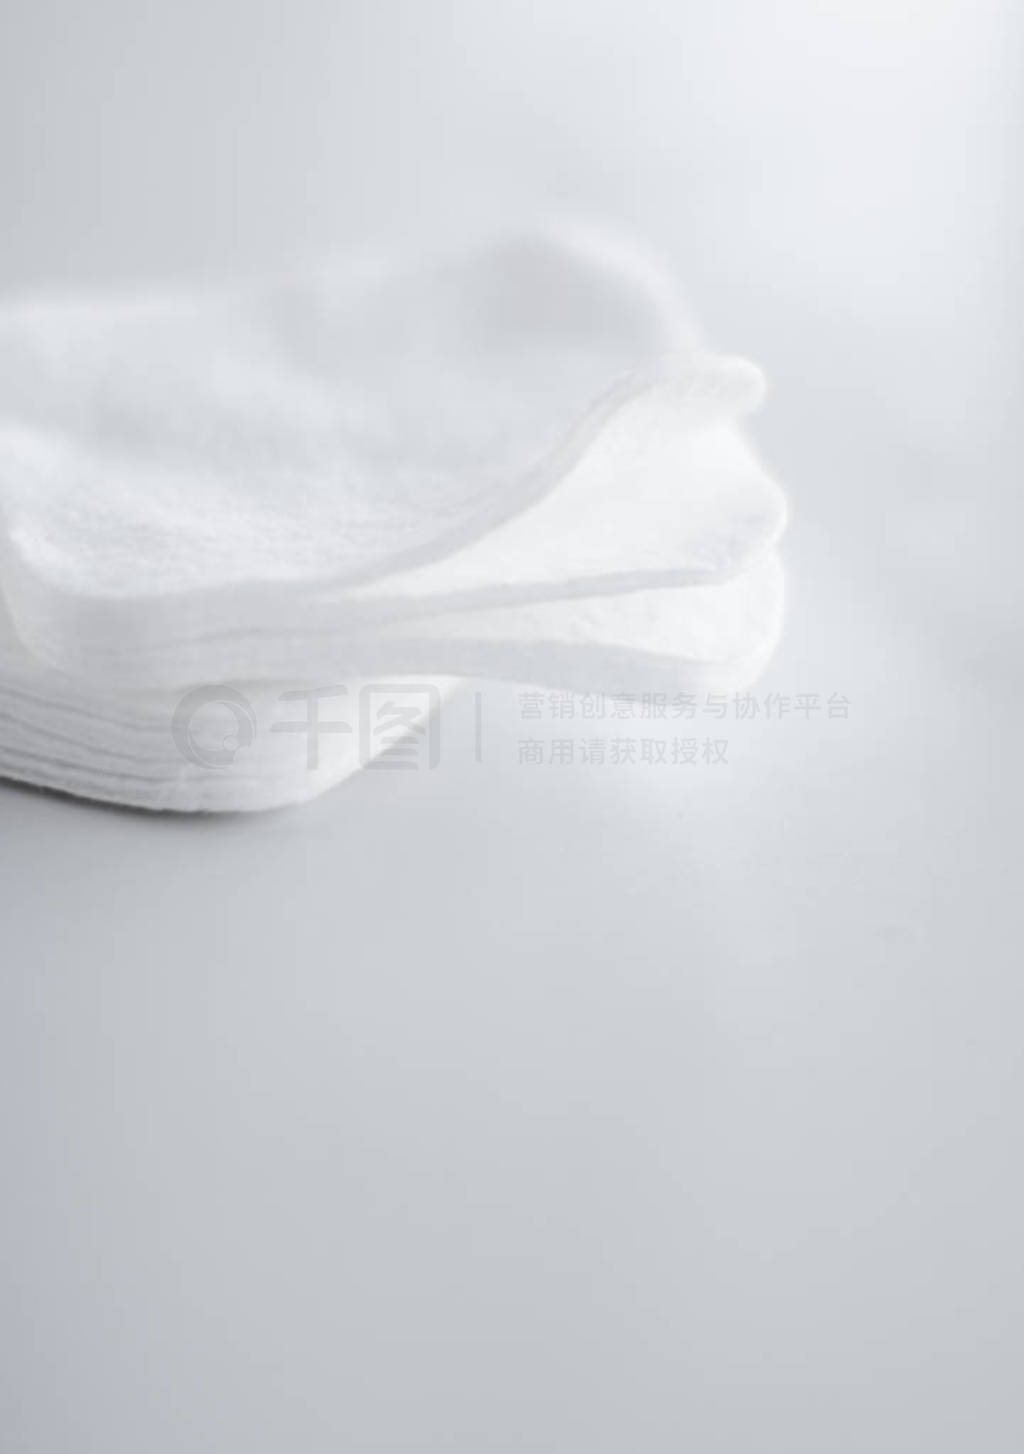 Organic cotton pads on marble background, cosmetics and make-up